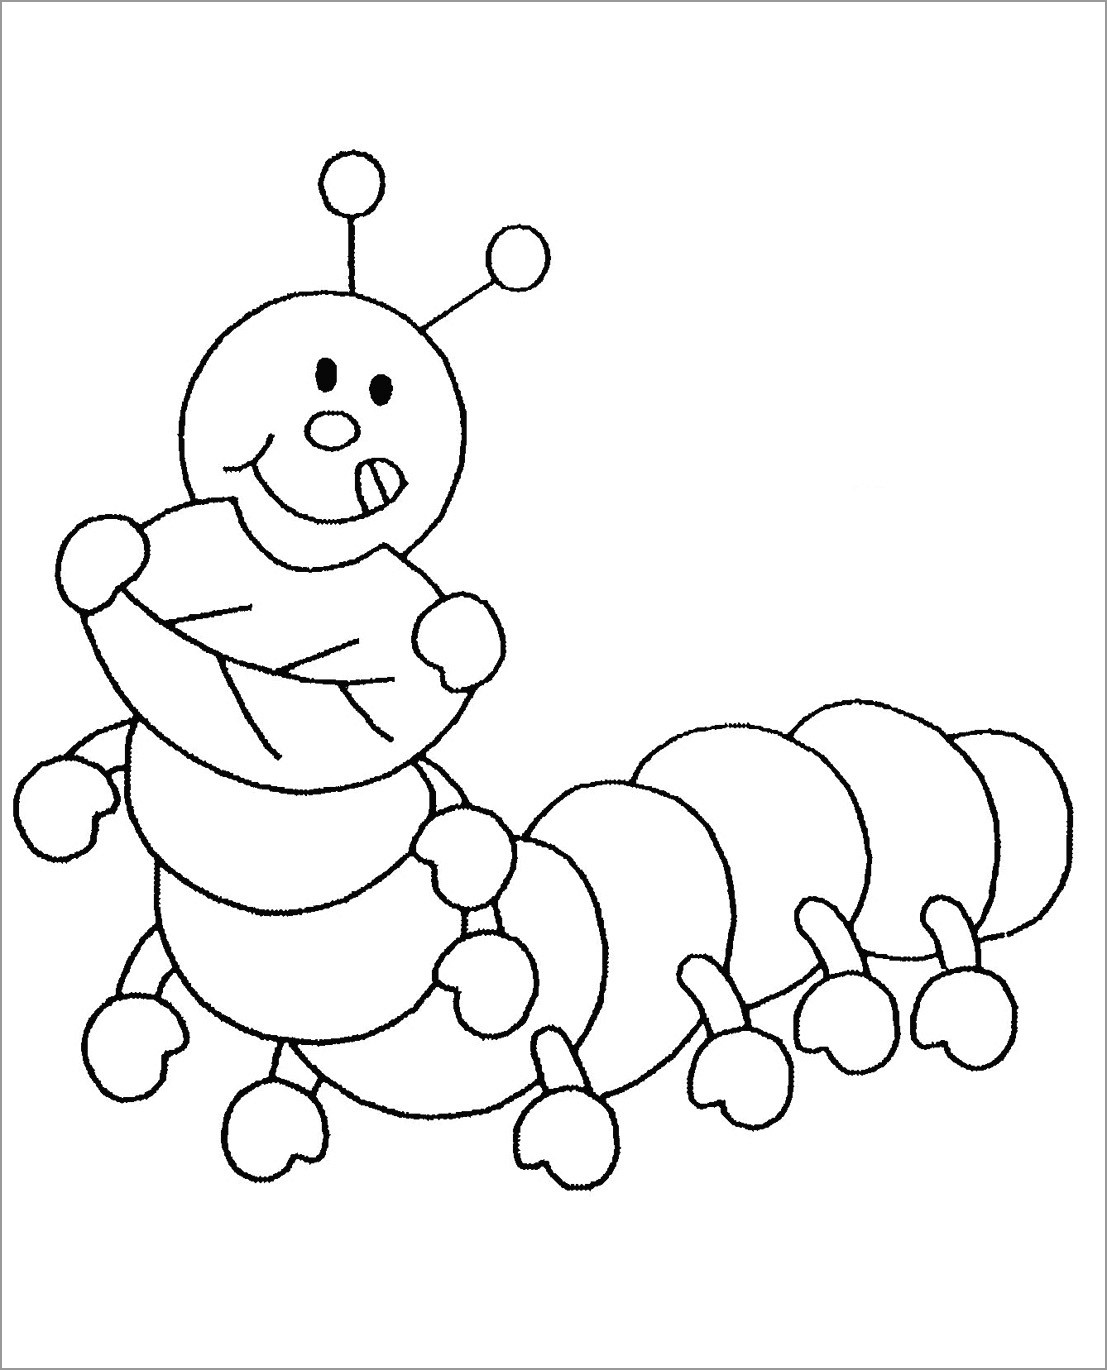 Caterpillar Insects Coloring Pages for Kids